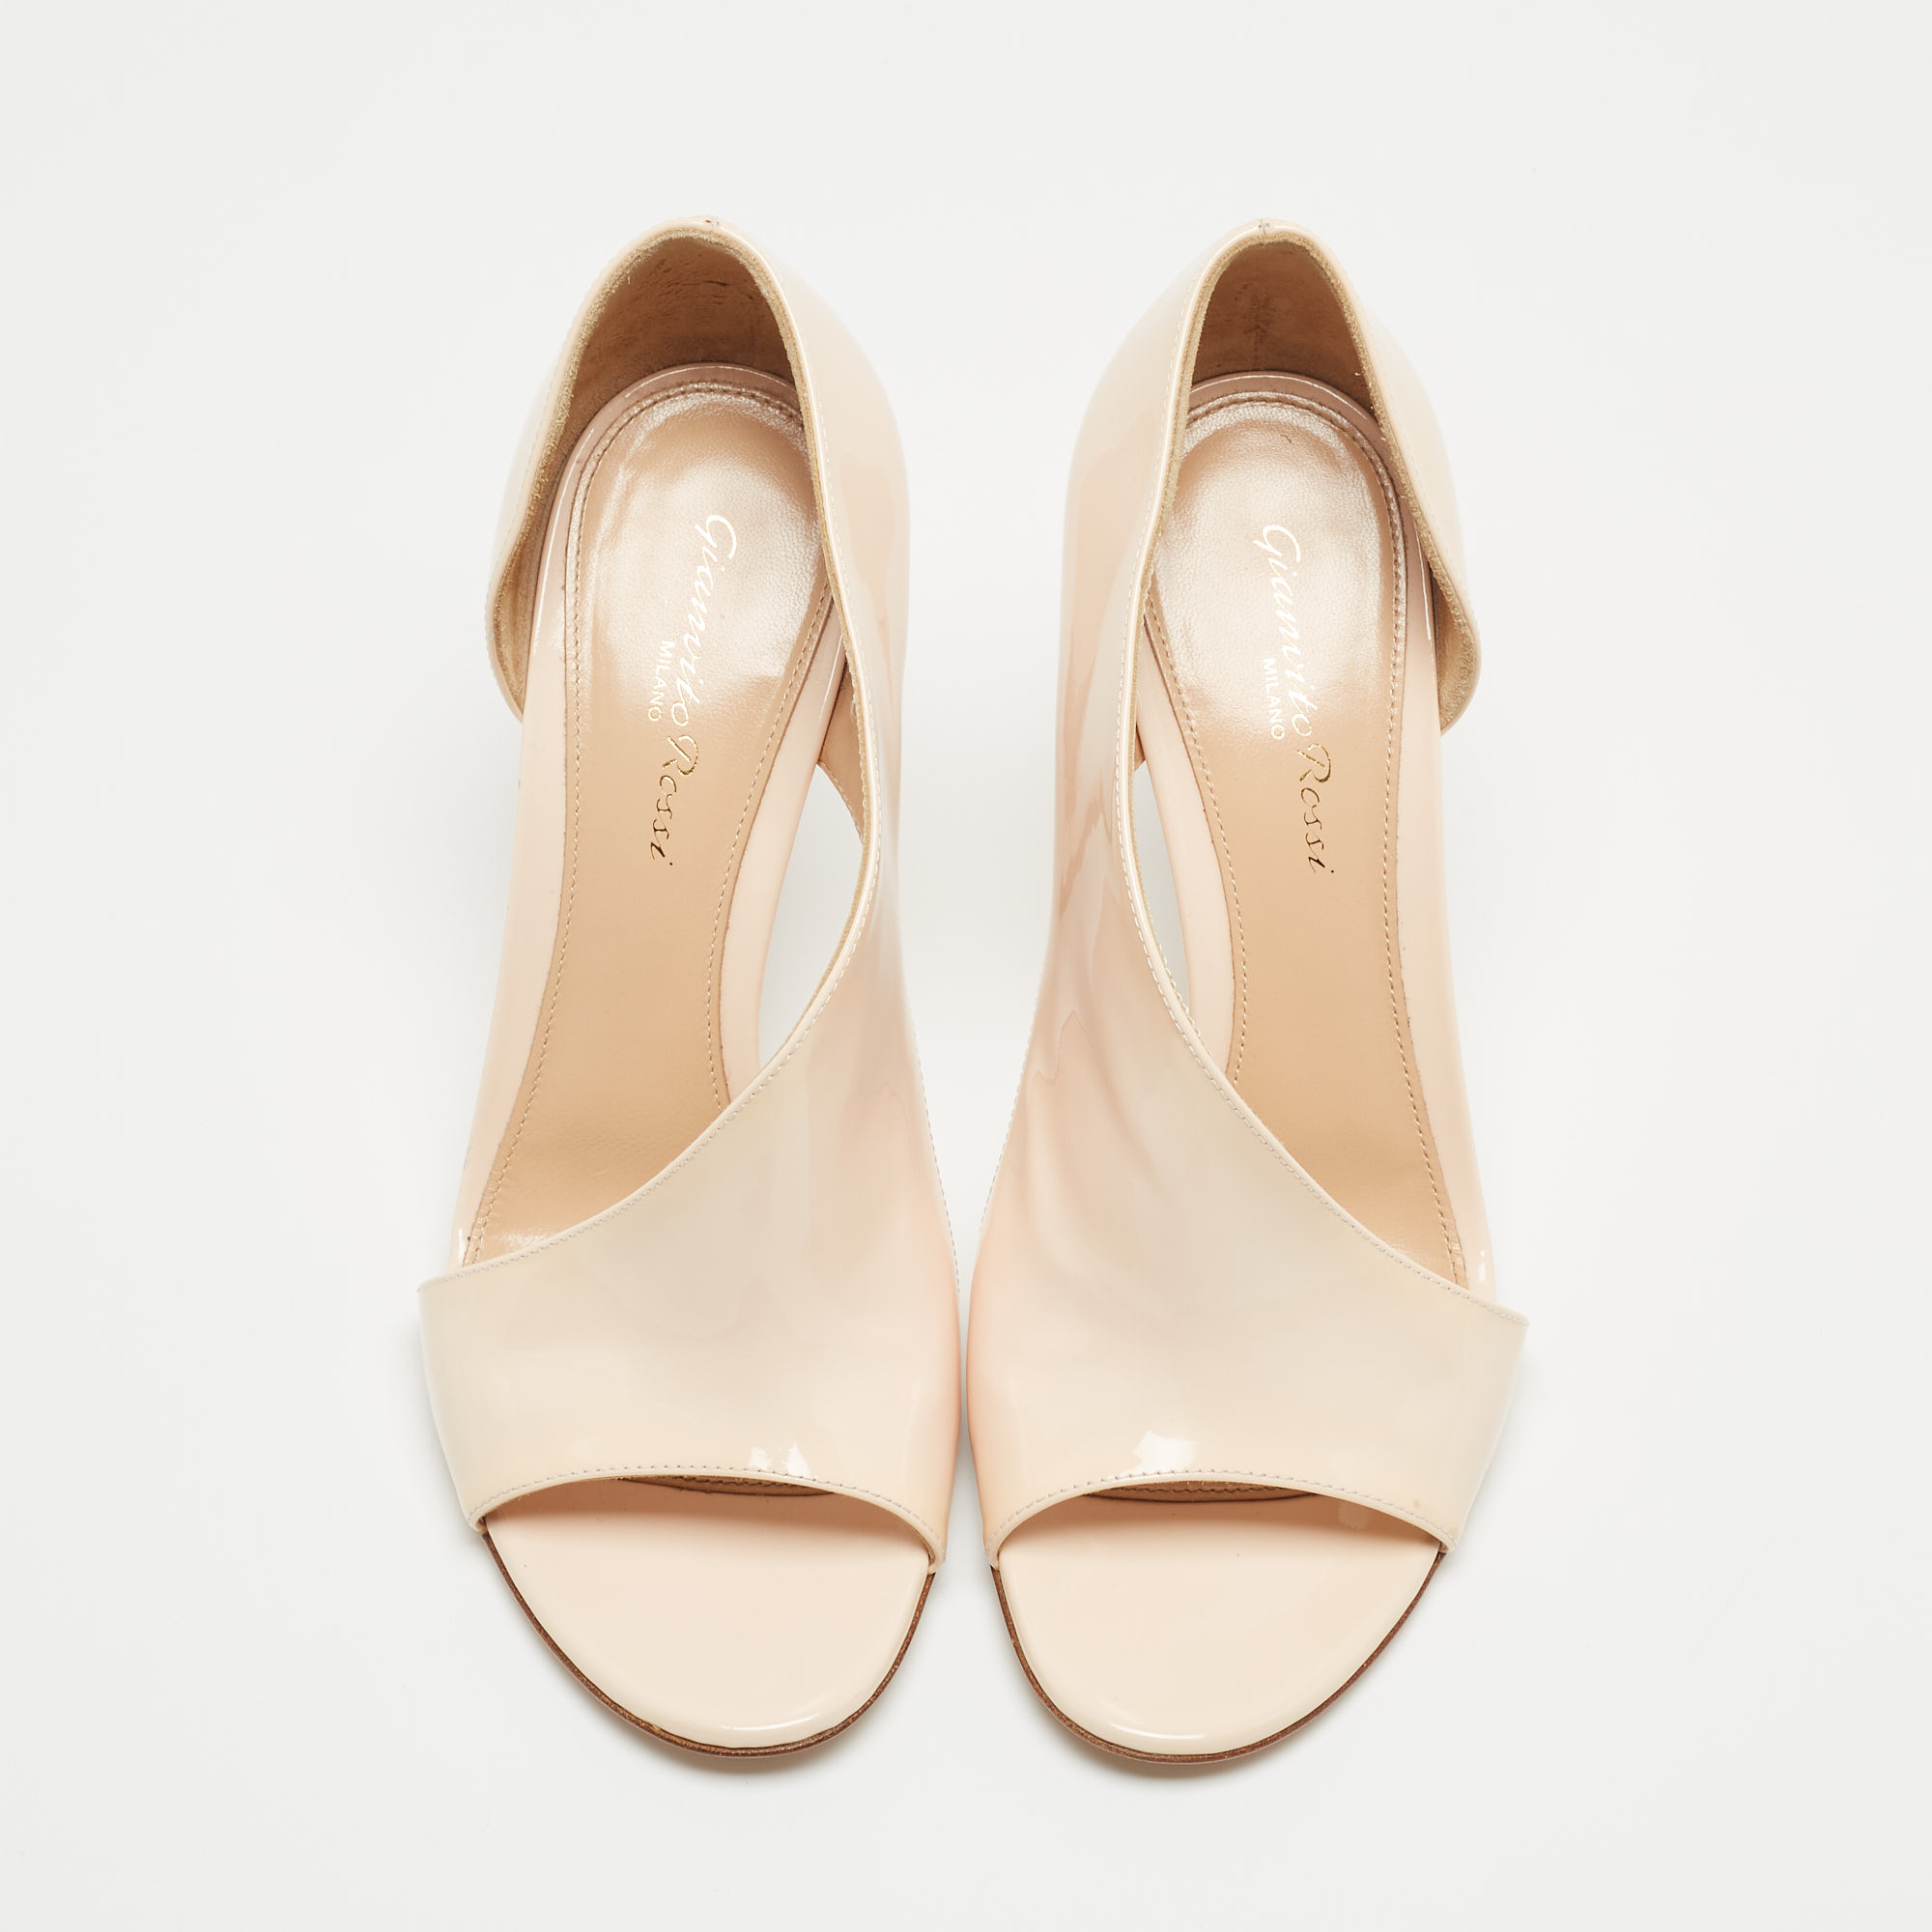 Gianvito Rossi Ivory Patent Asymmetic Heeled Pumps Size 38